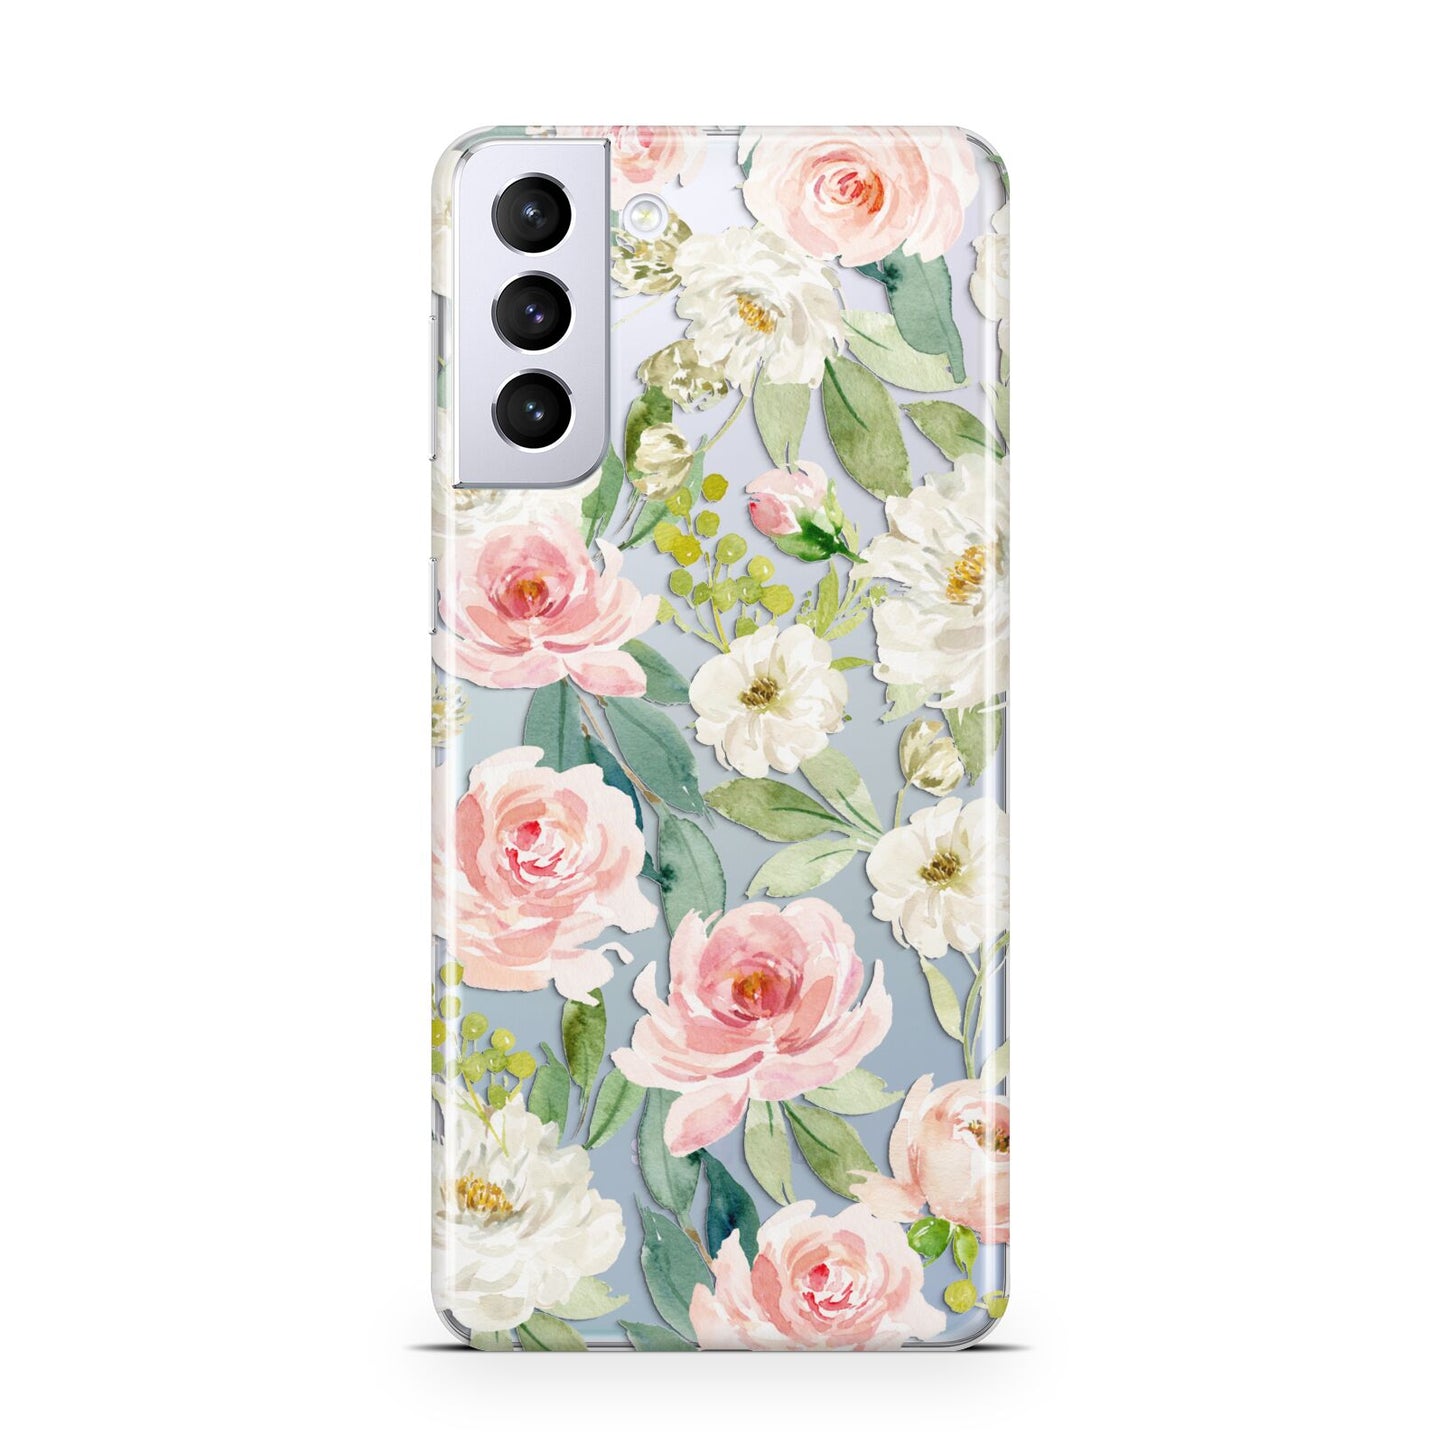 Watercolour Peonies Roses and Foliage Samsung S21 Plus Phone Case